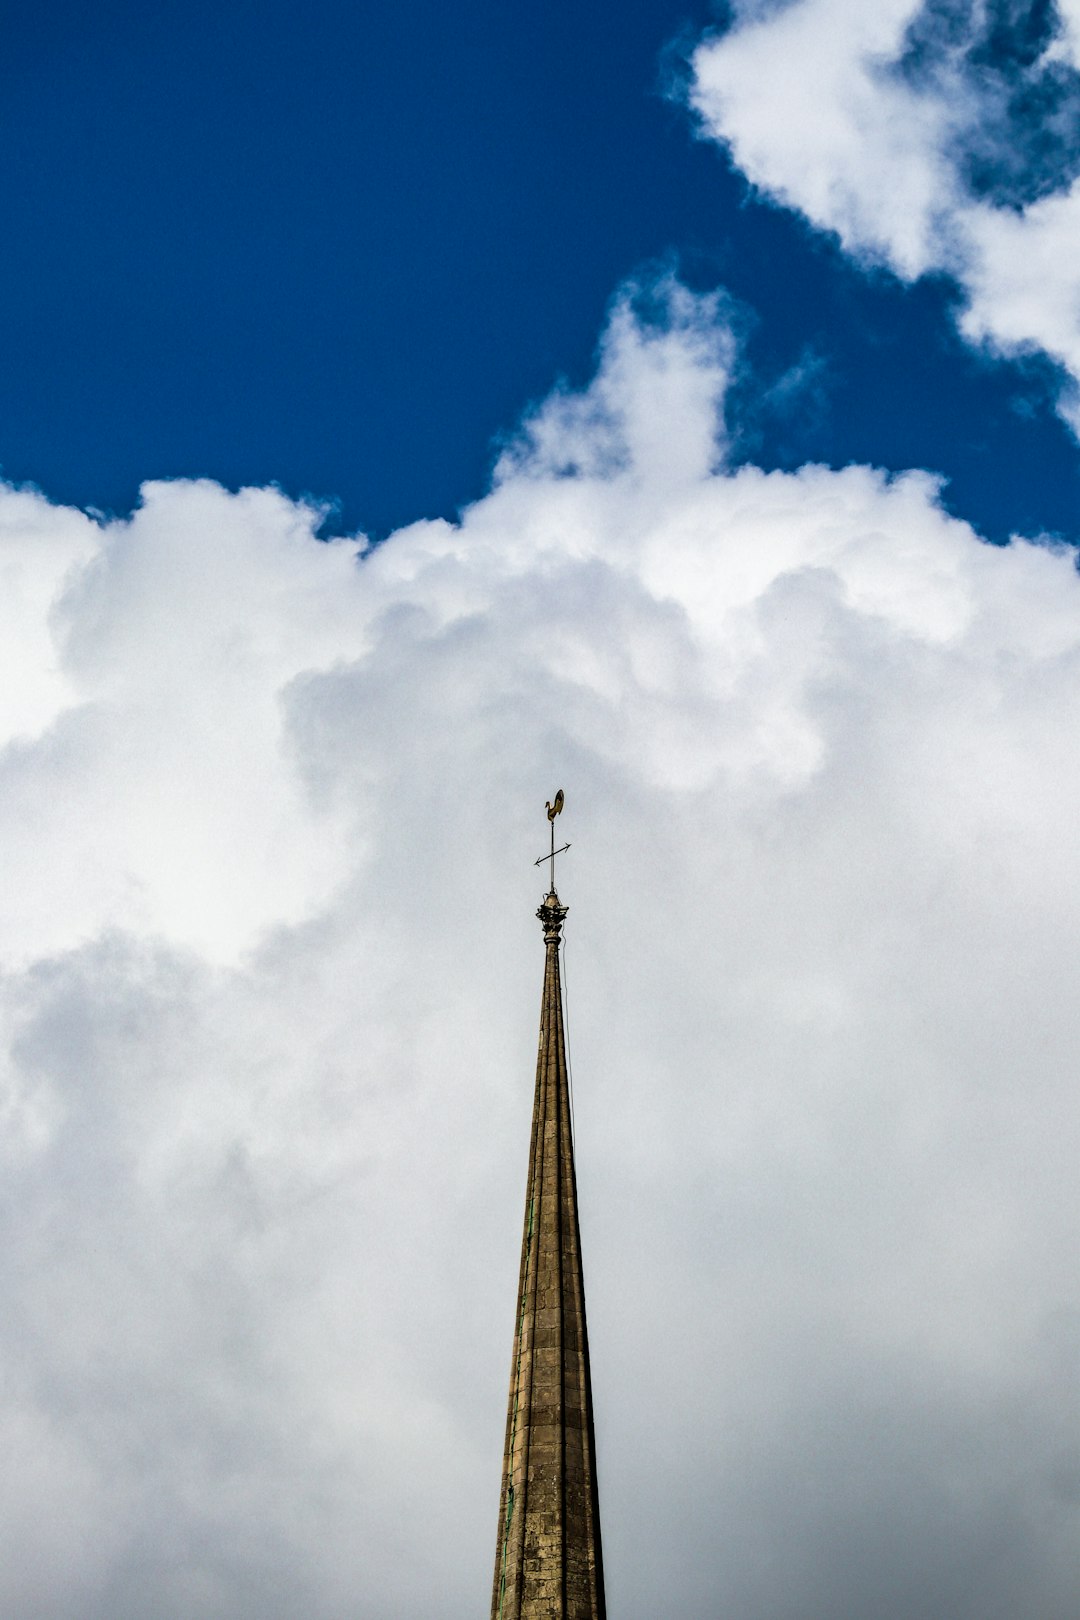 brown tower under blue sky and white clouds during daytime